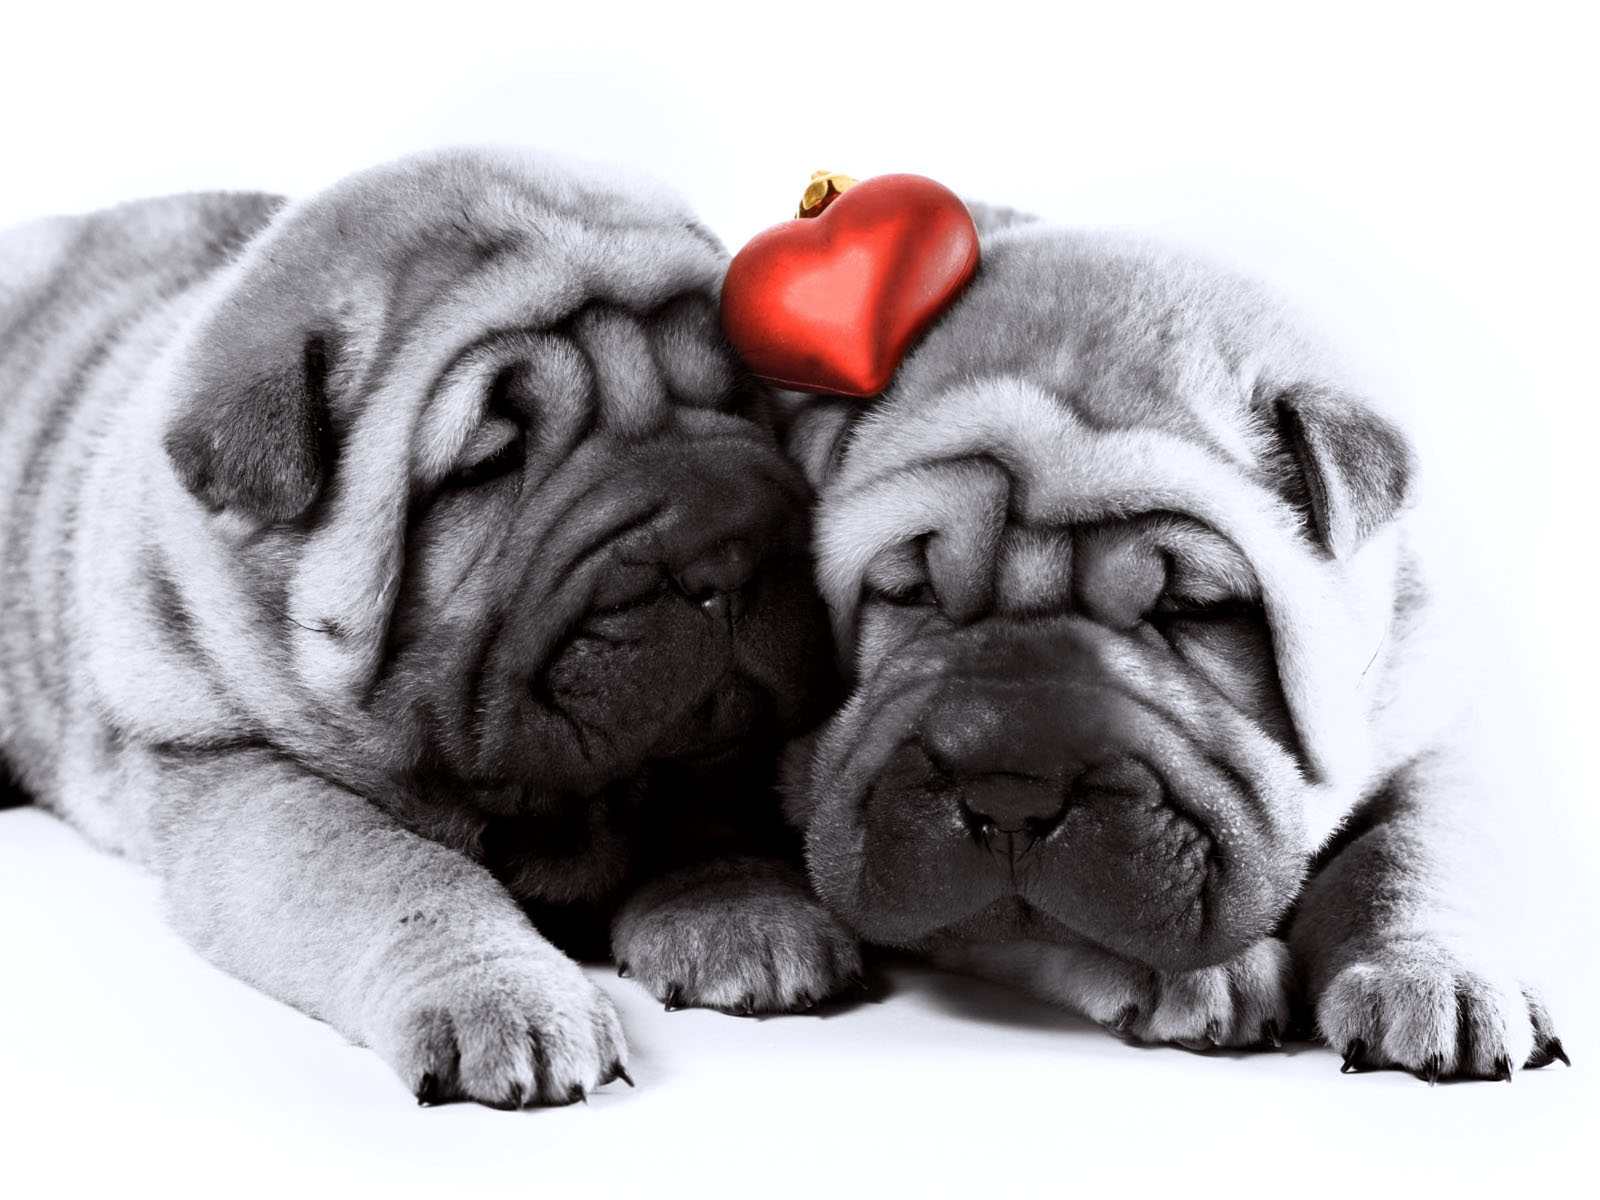 Gray Dog Love couple Image Wallpapers HD / Desktop and Mobile Backgrounds